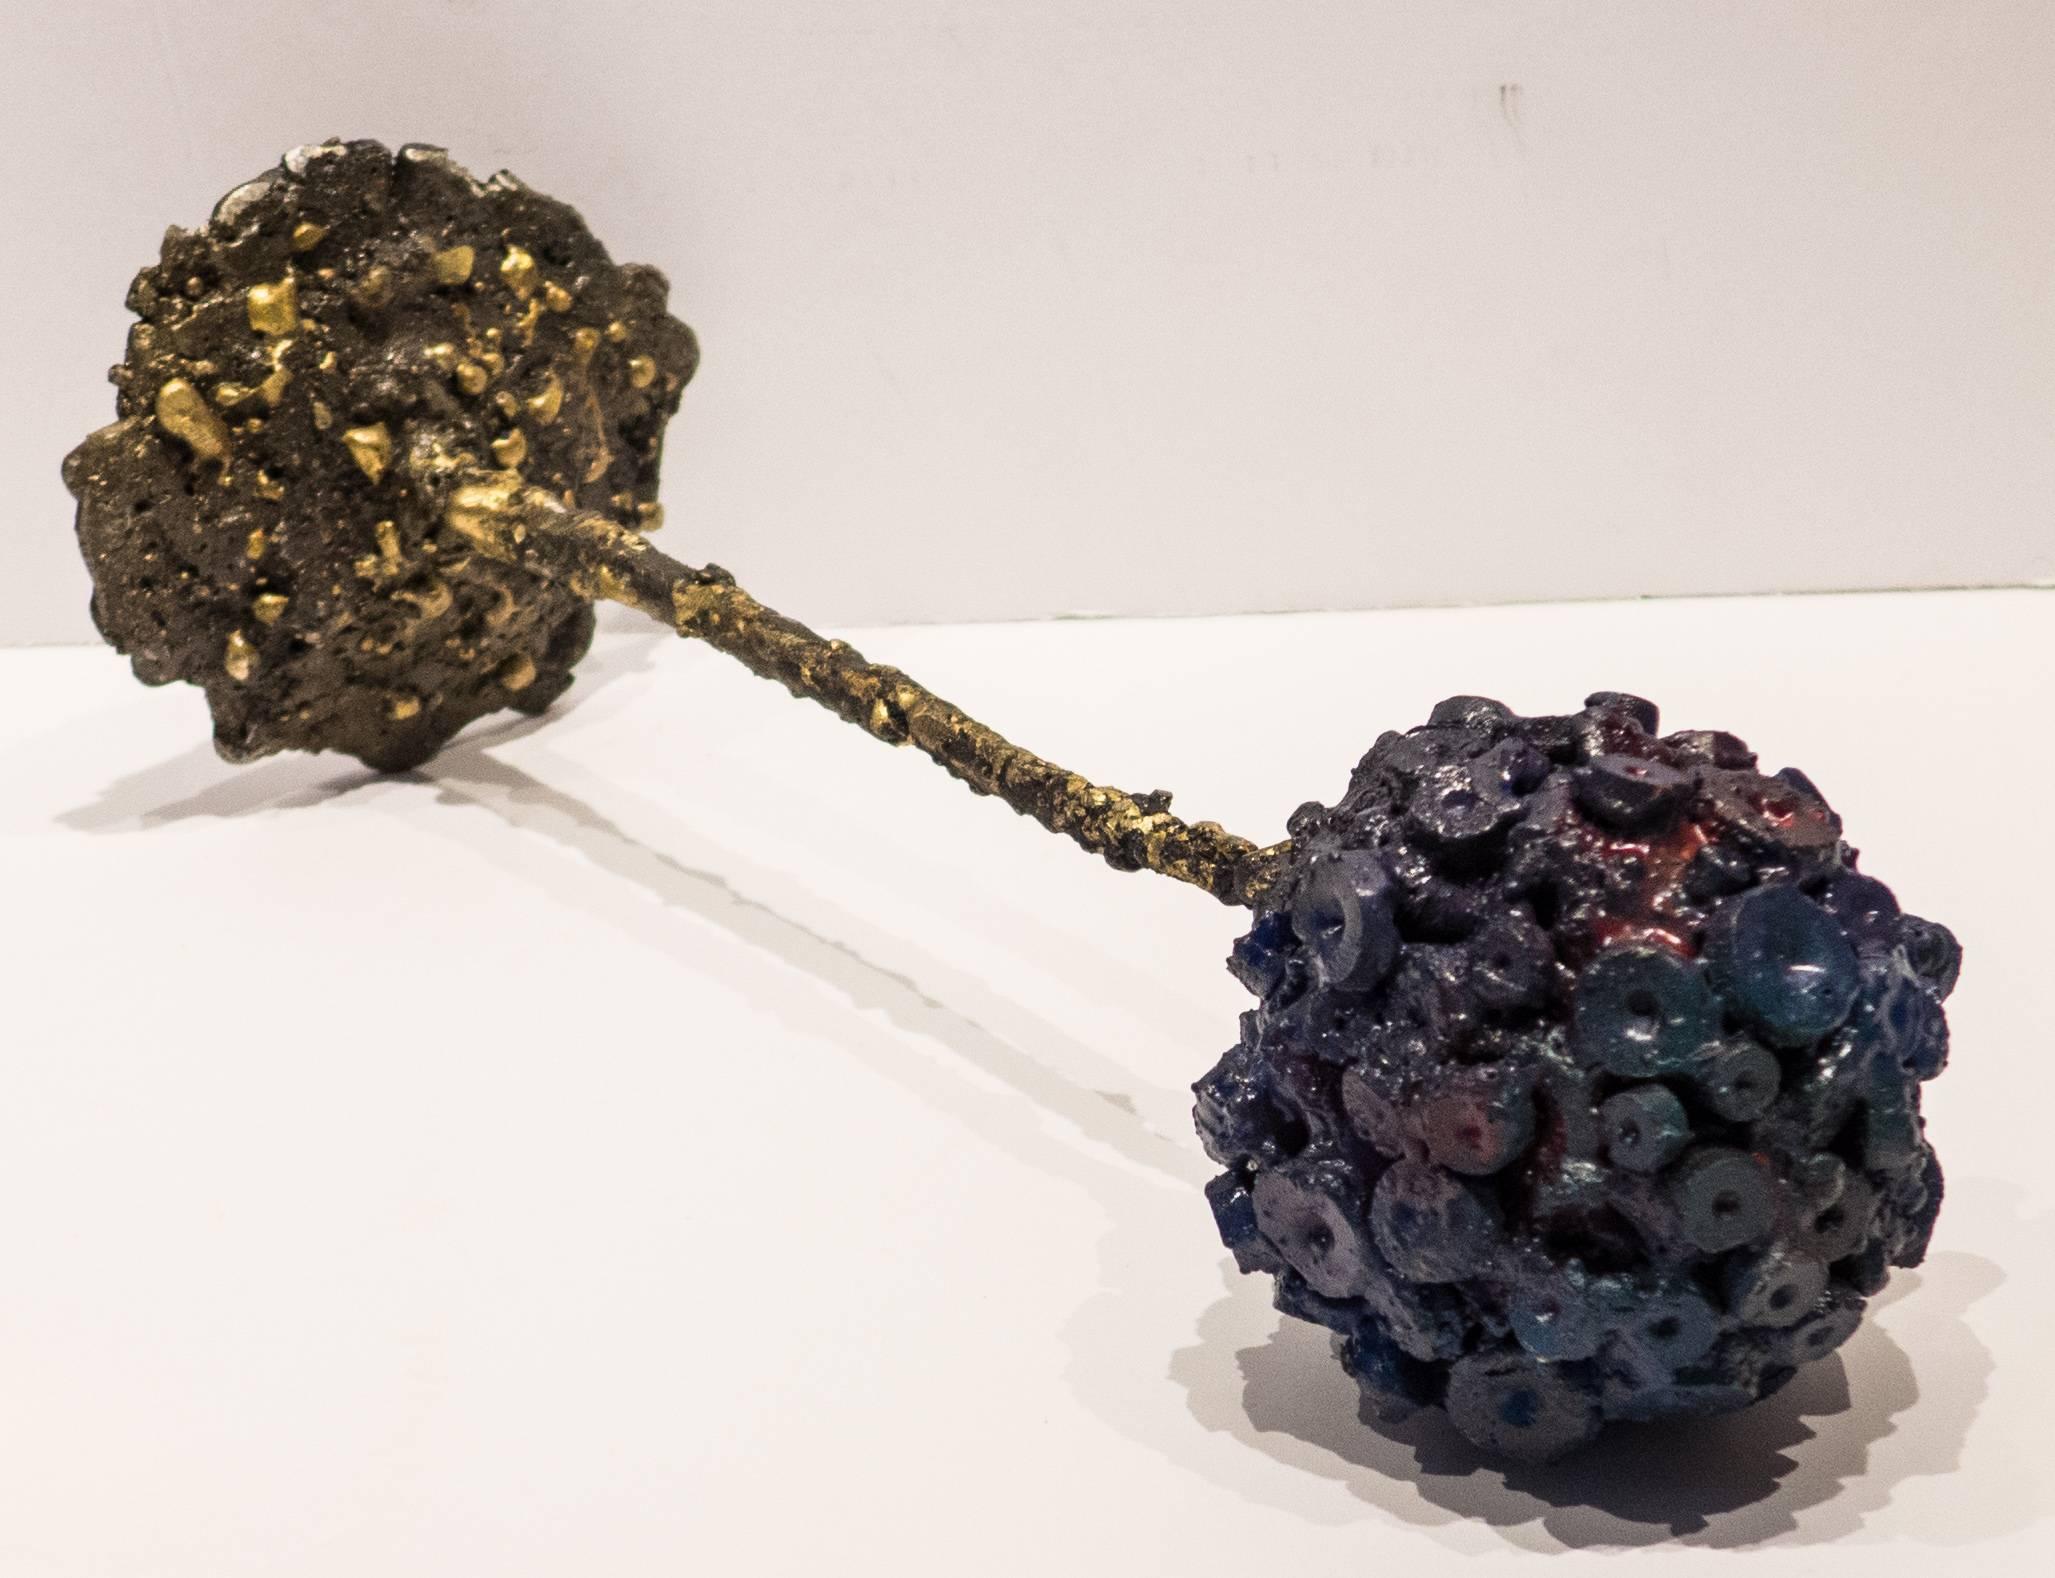 Brutalist botanical sculpture of blackened steel with bronze and glass titled "Allium (Blue)" by Des Moines, Iowa artist James Bearden. Bearden's work was recently featured in a solo exhibition at the NY Design Center titled "James